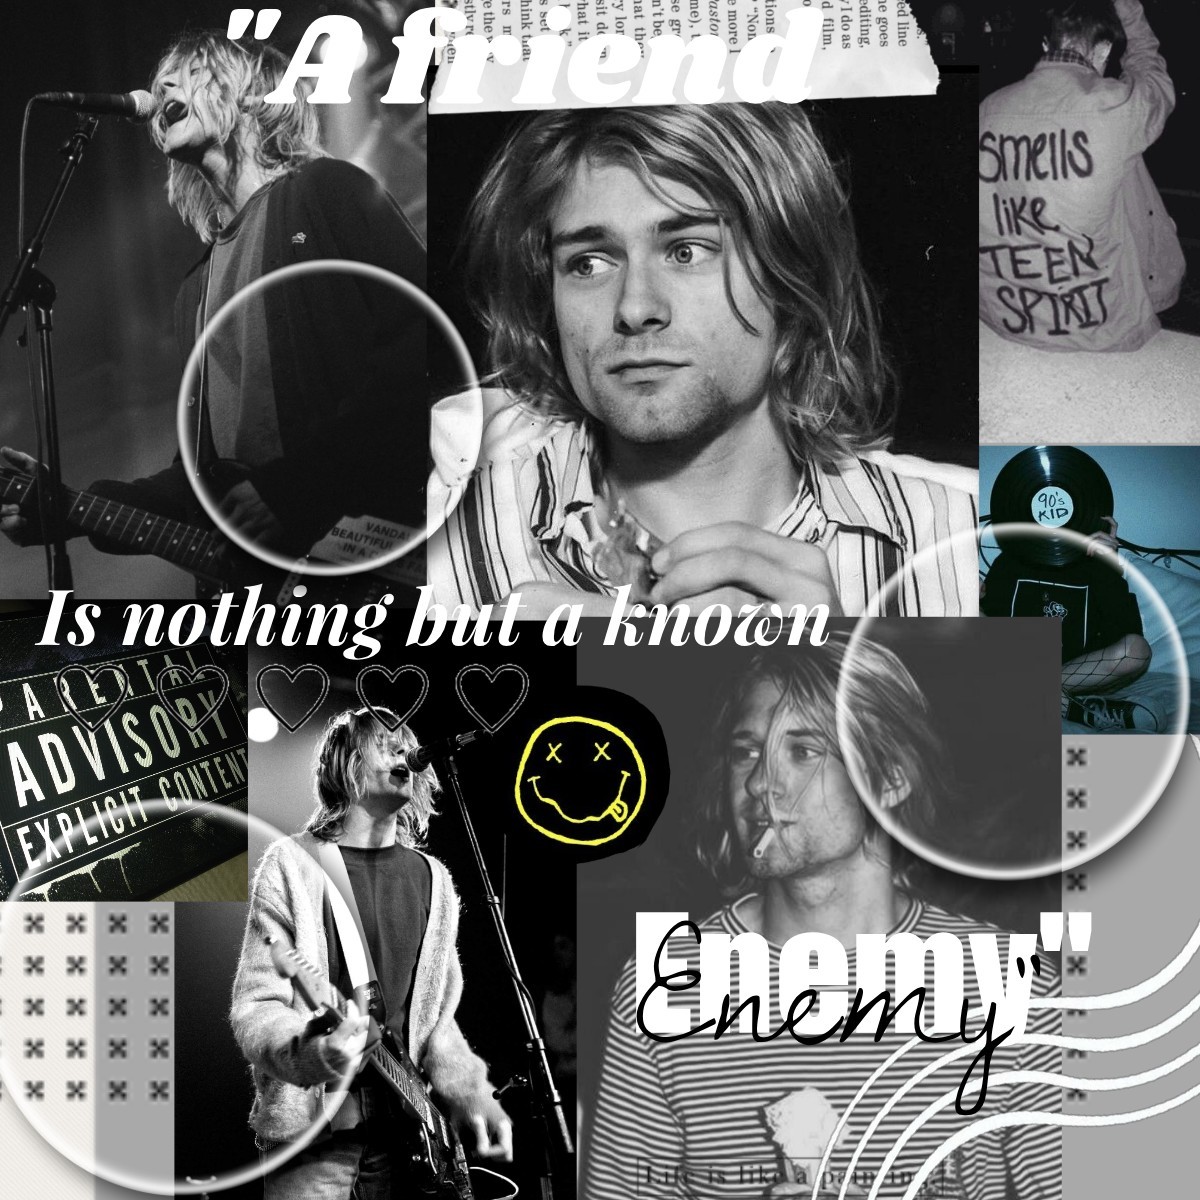 🚬tap🏳
hello! here is a Kurt cobain collage I've been really loving nirvana recently specially "somethings in the way"!
love you guys!